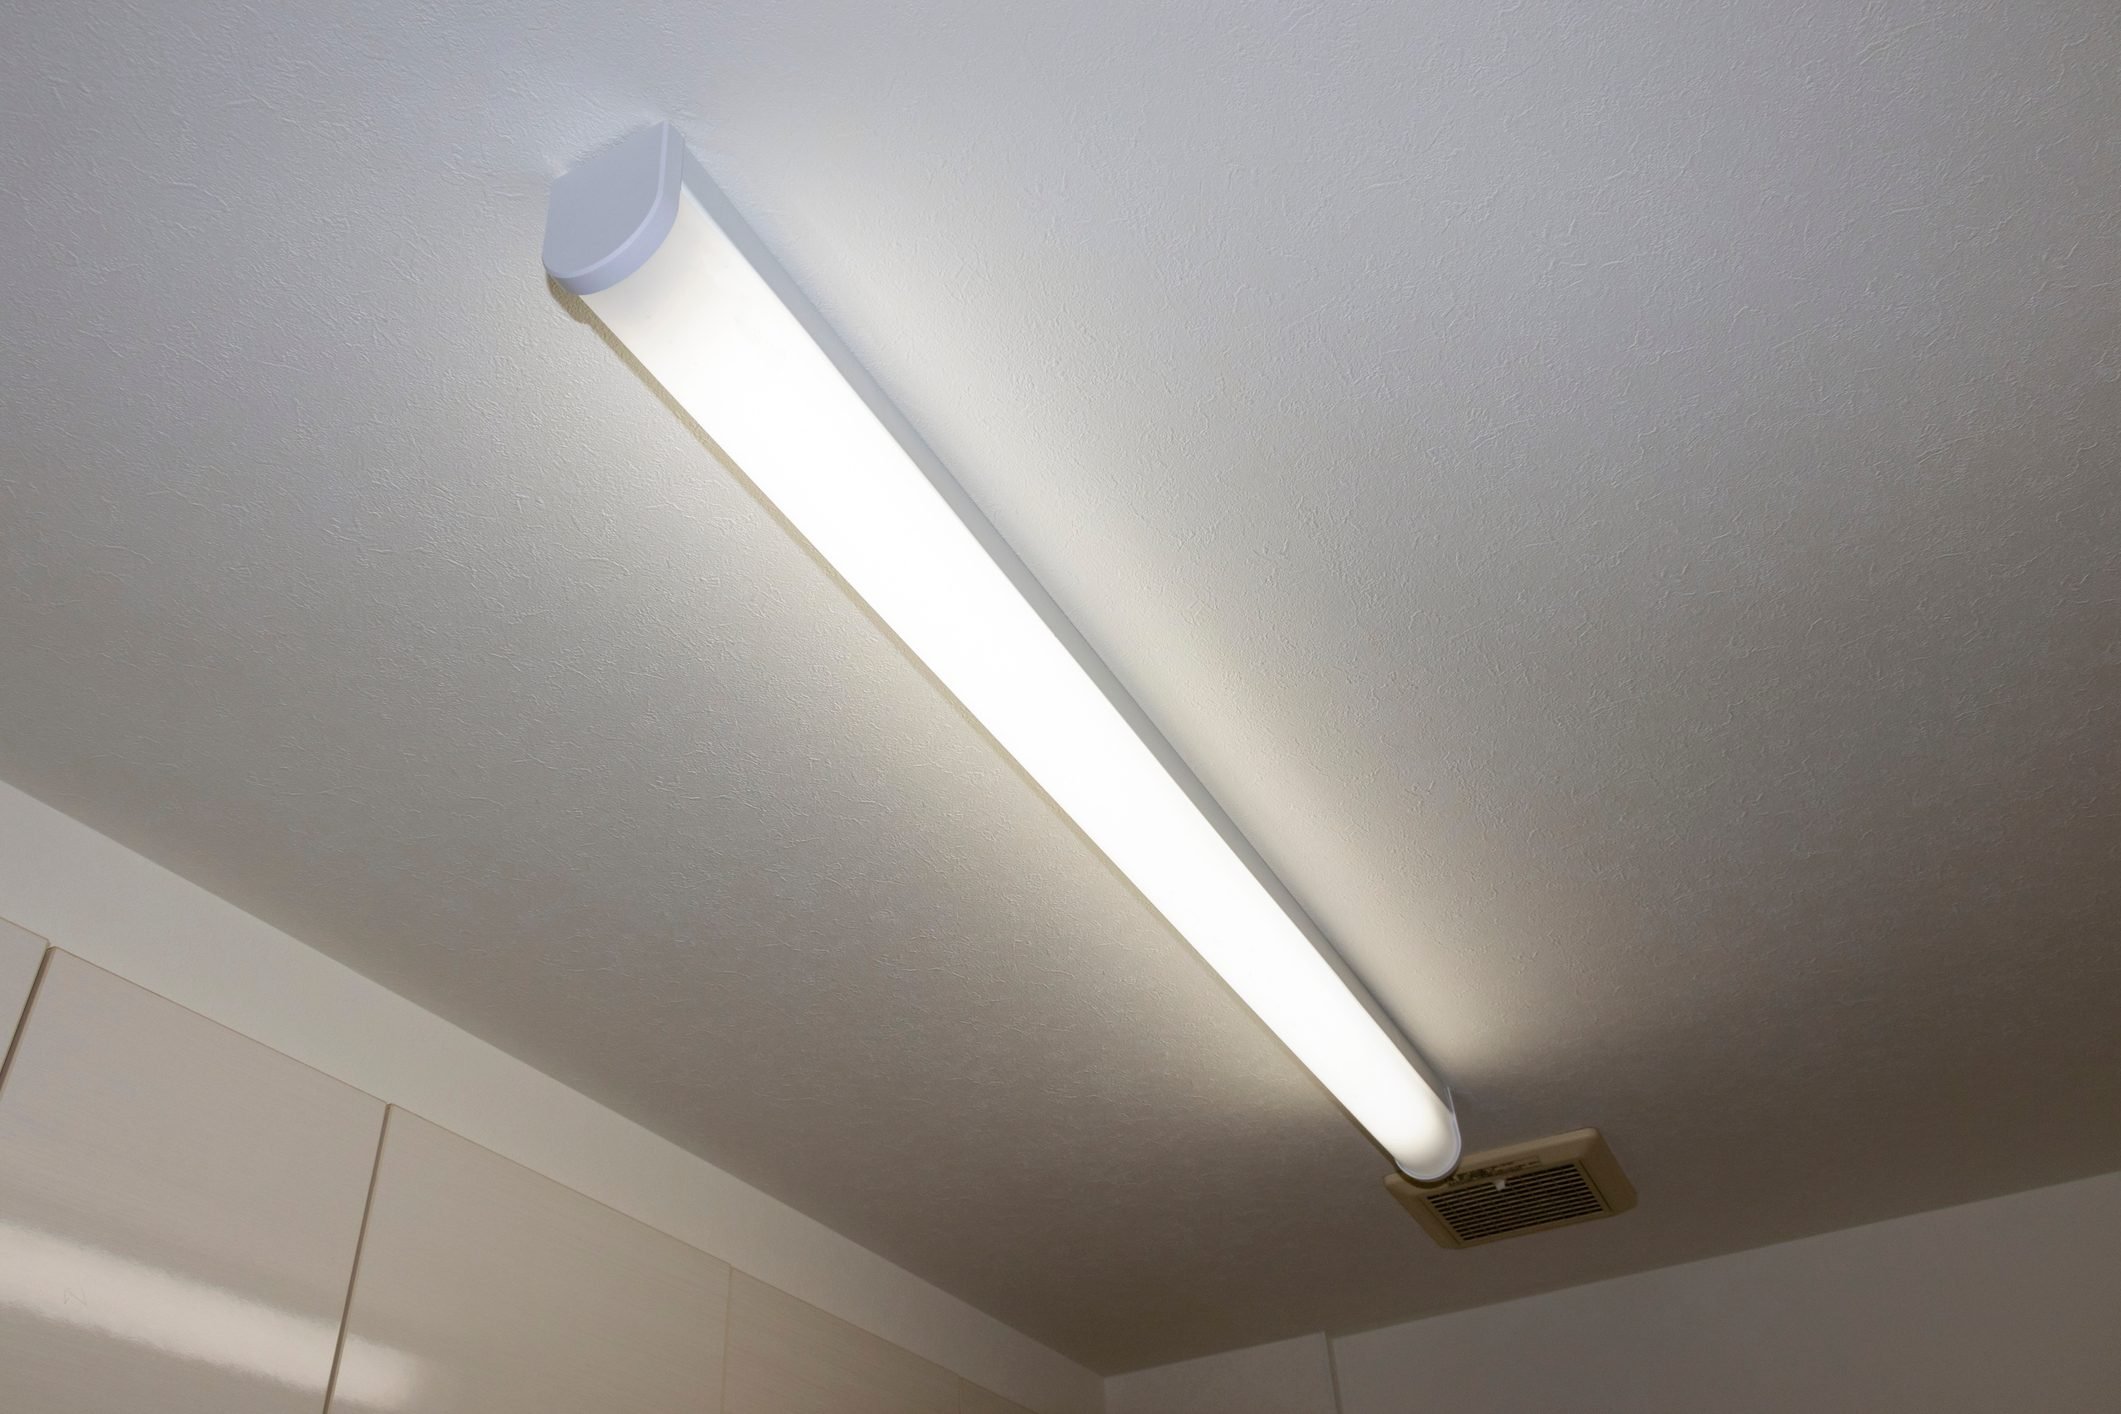 Fluorescent Lights: What Are They and How Do They Work?